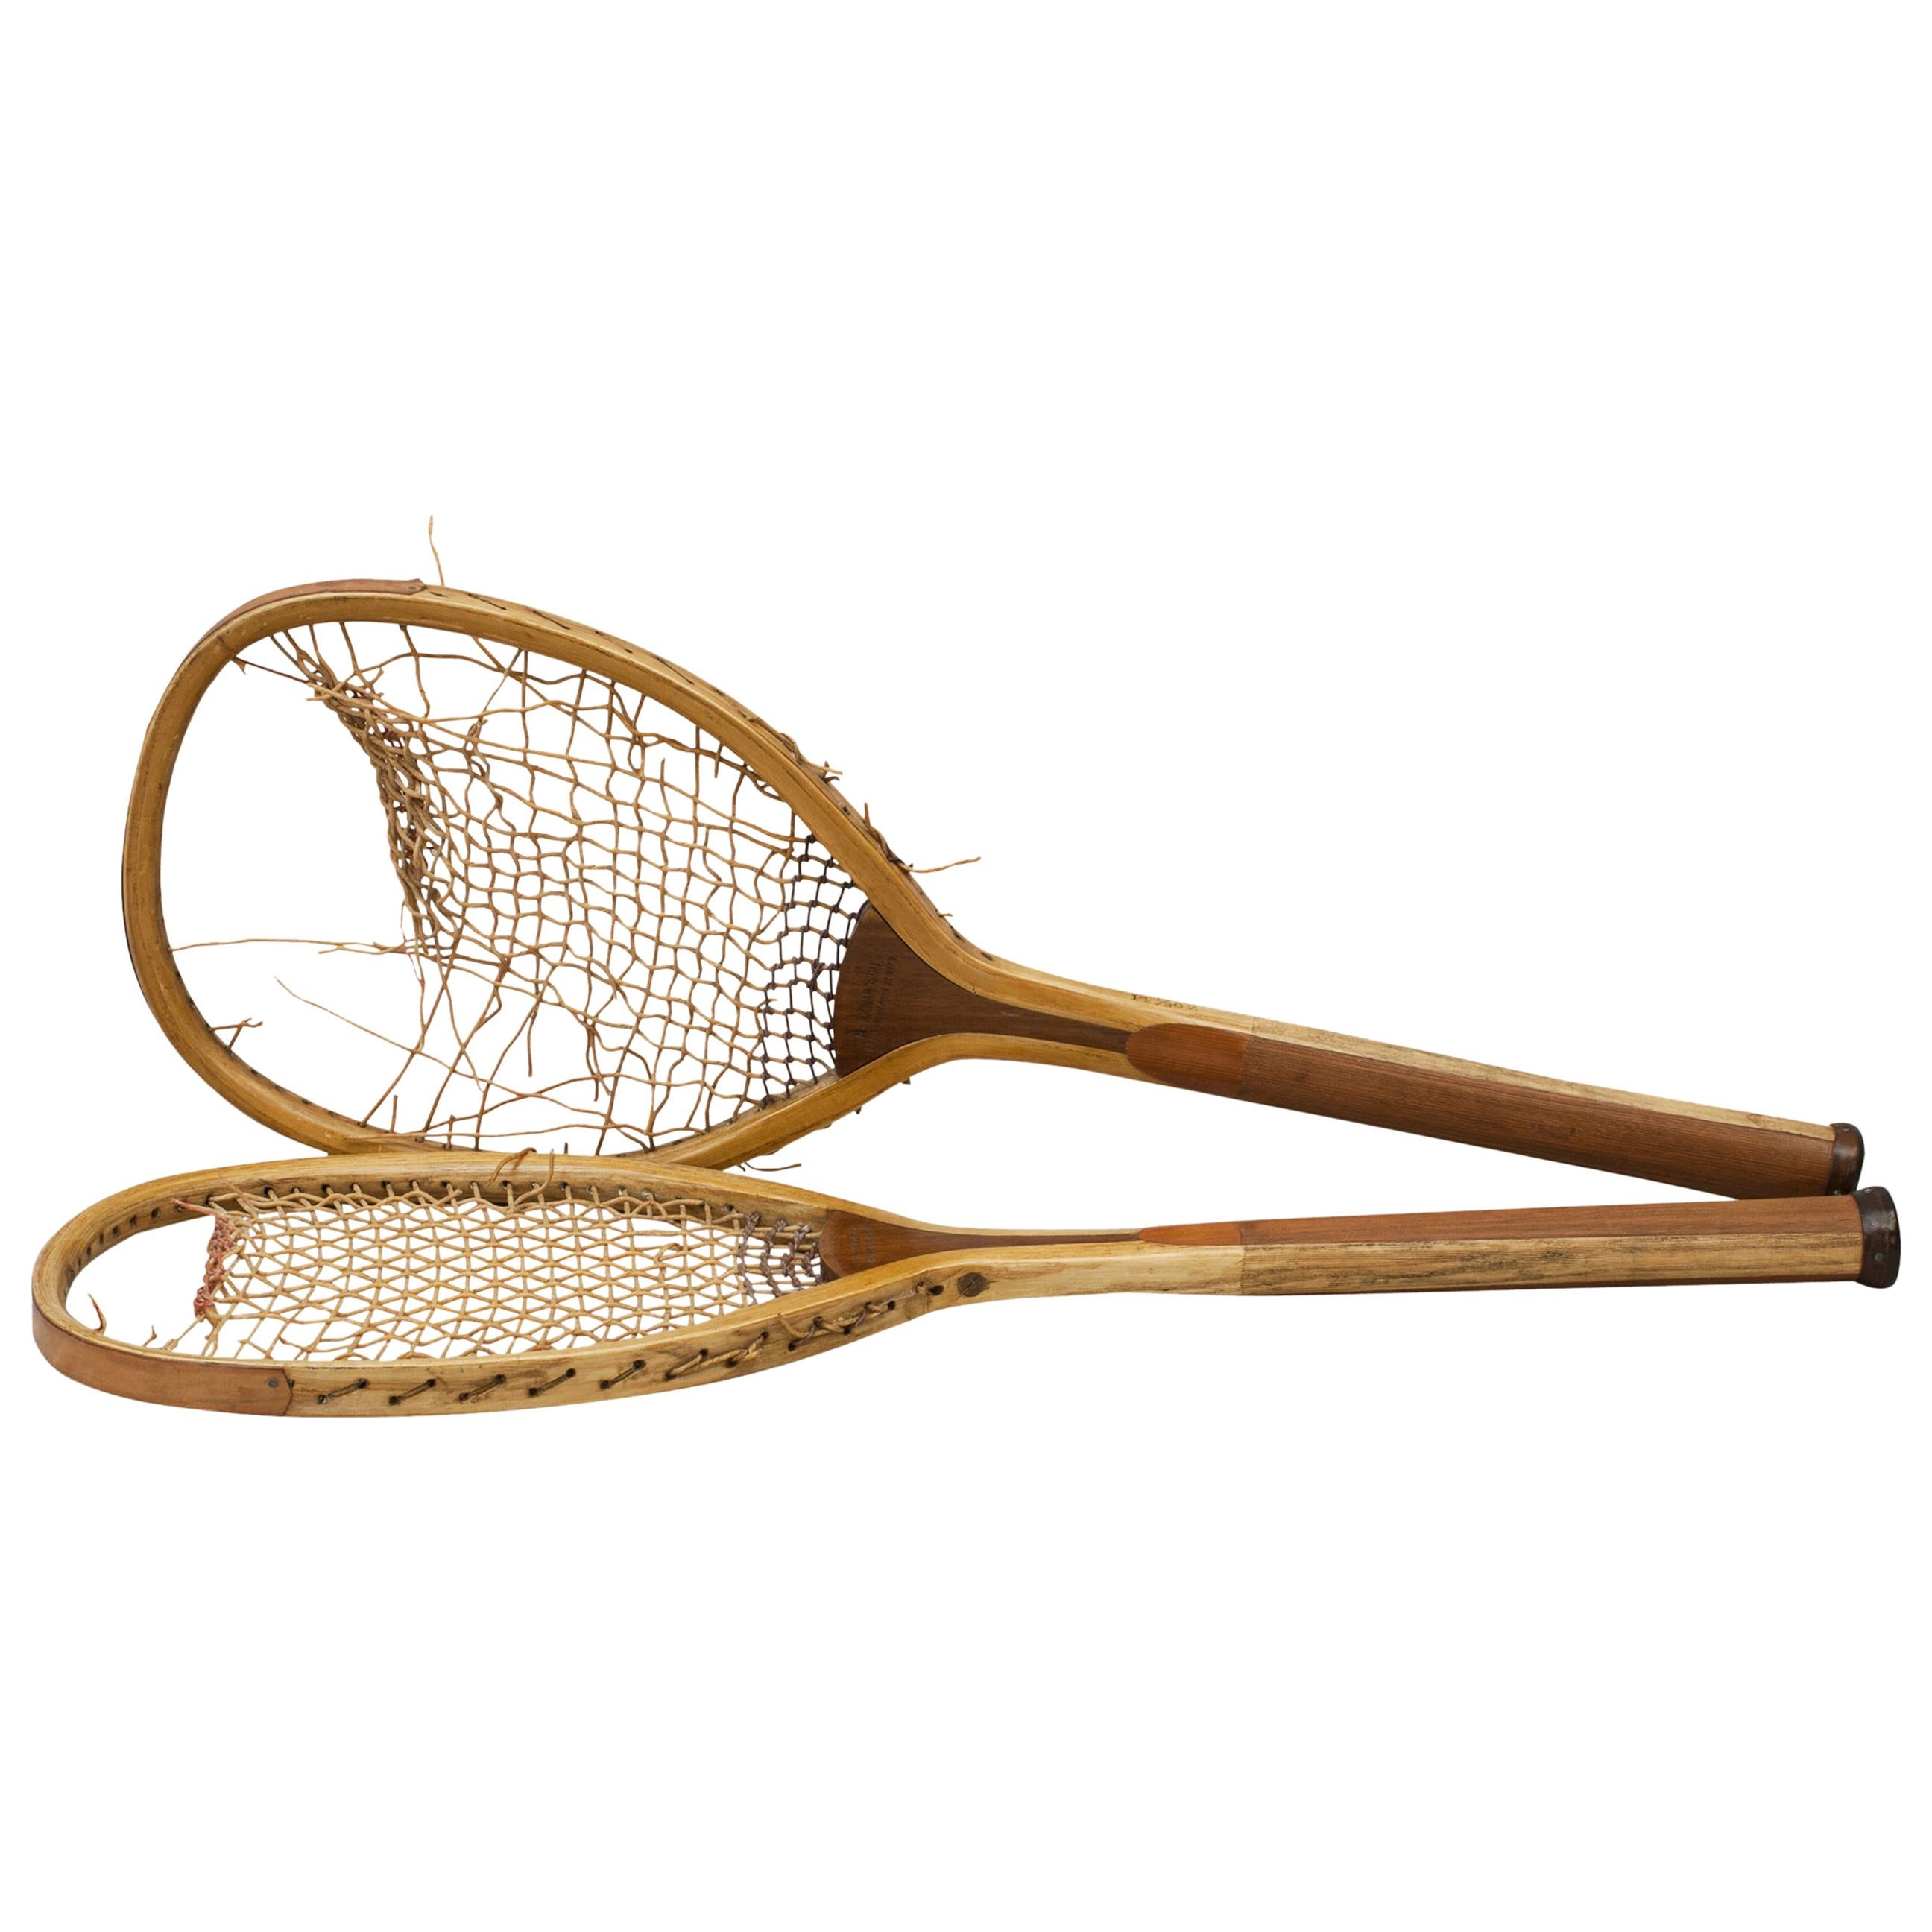 Pair of Early H. Richardson Lawn Tennis Rackets